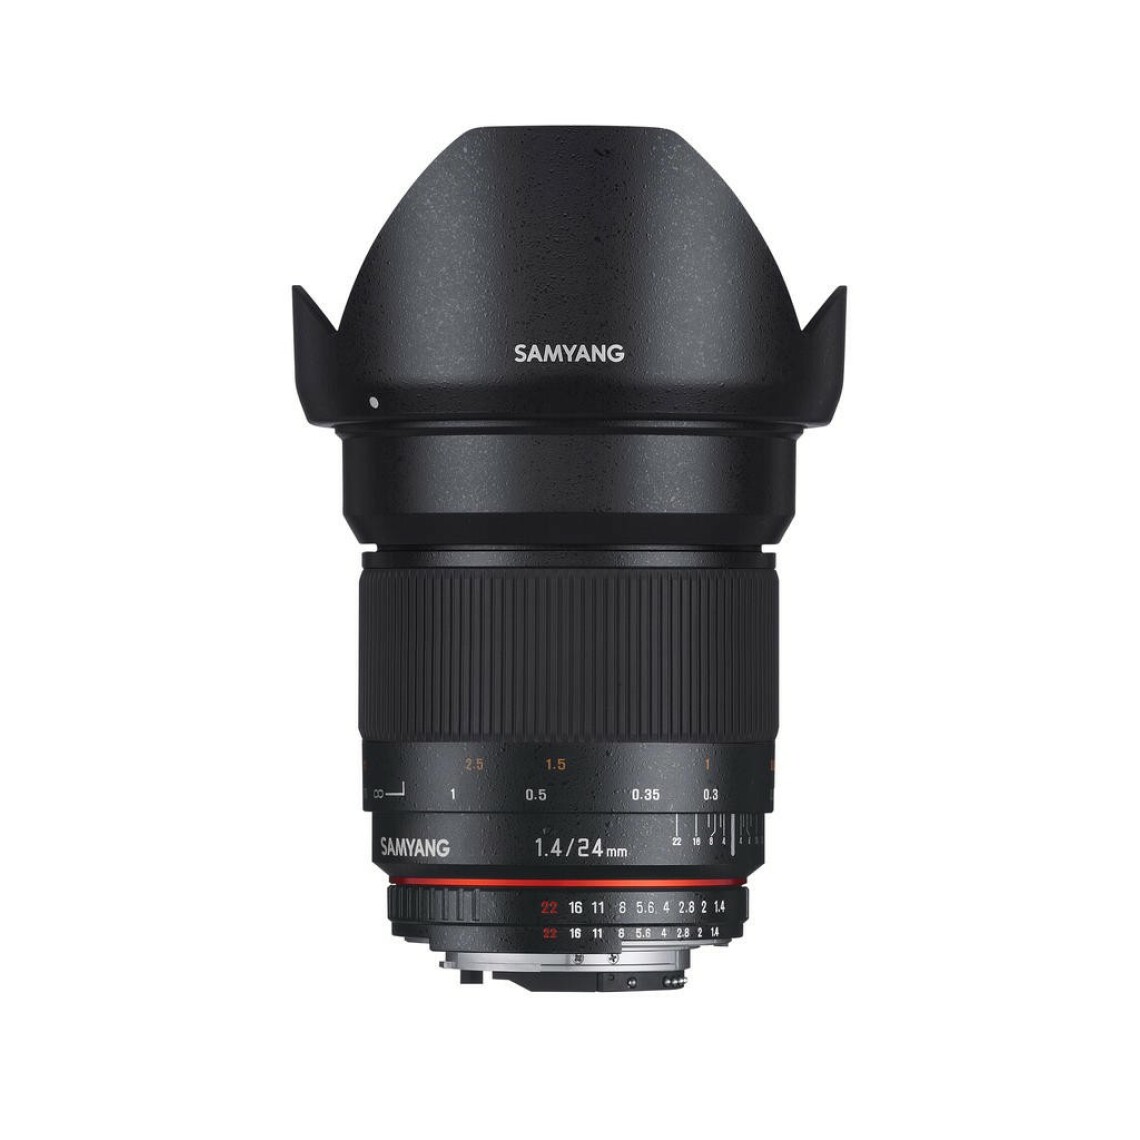 Samyang - Zoom 24 mm f/1.4 Ed As If Umc monture Canon - Objectif Photo